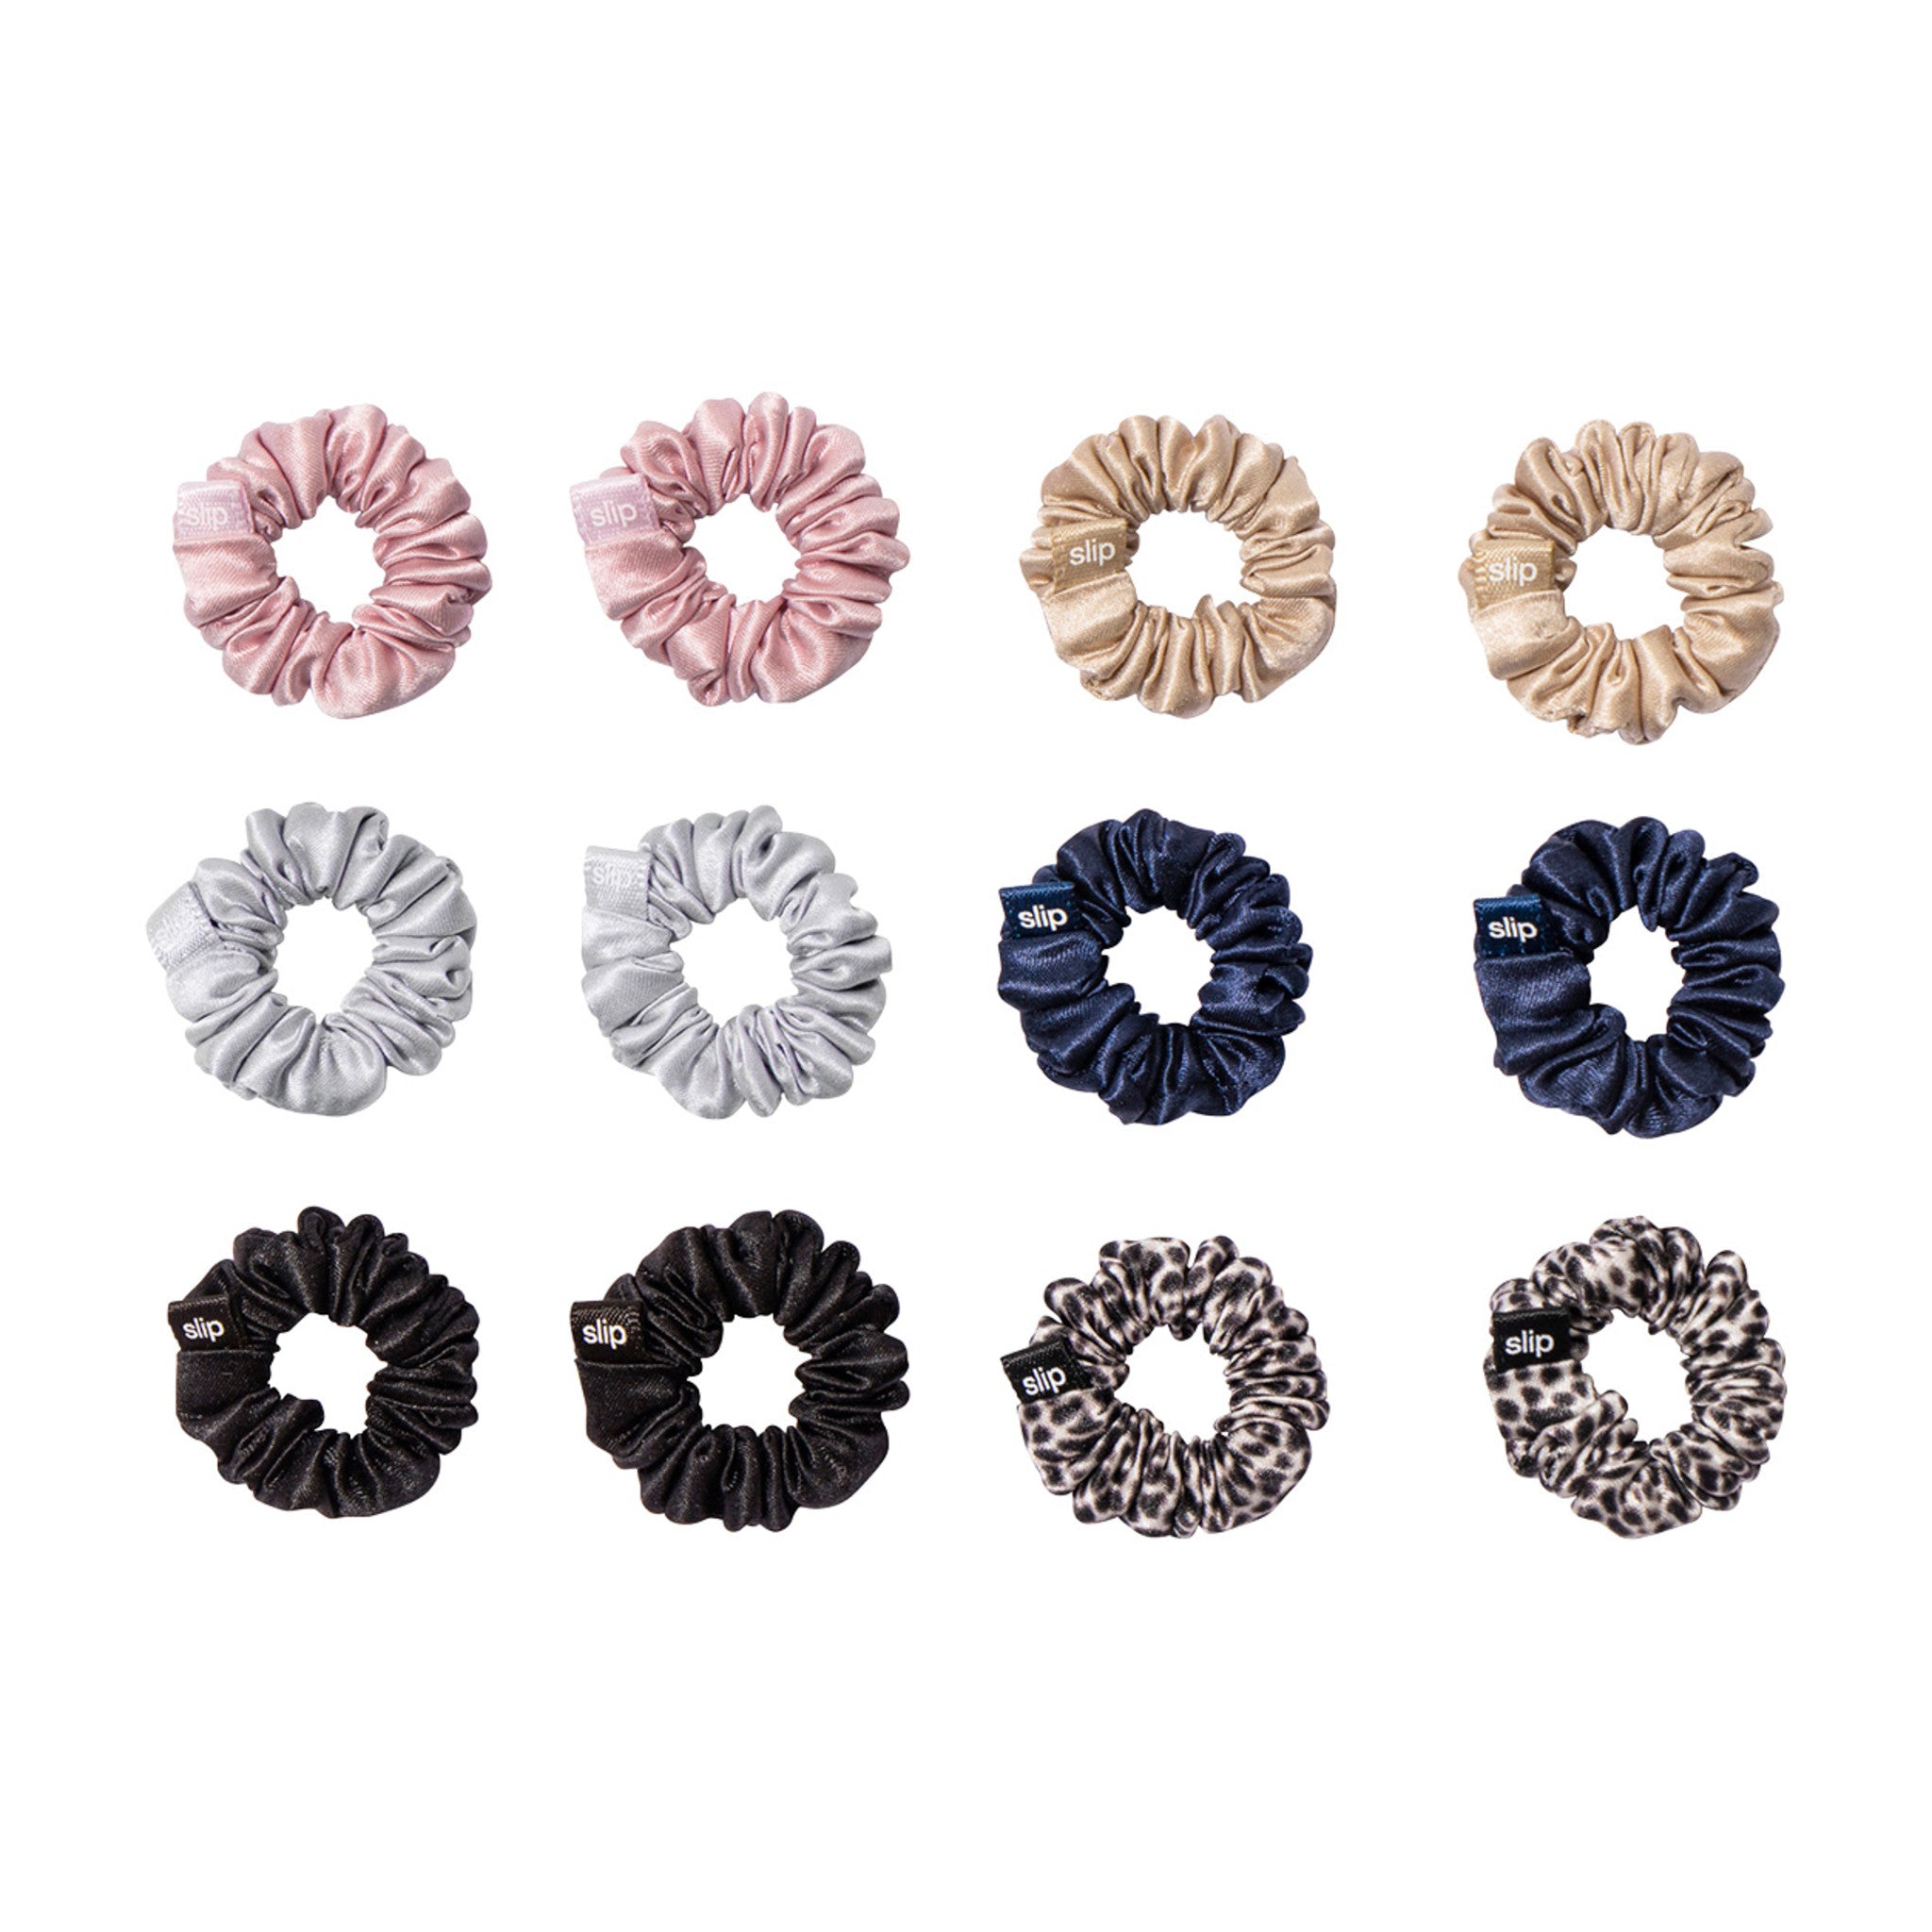 Slip Pure Silk Minnie Scrunchies Color/Shade variant: Classic main image.